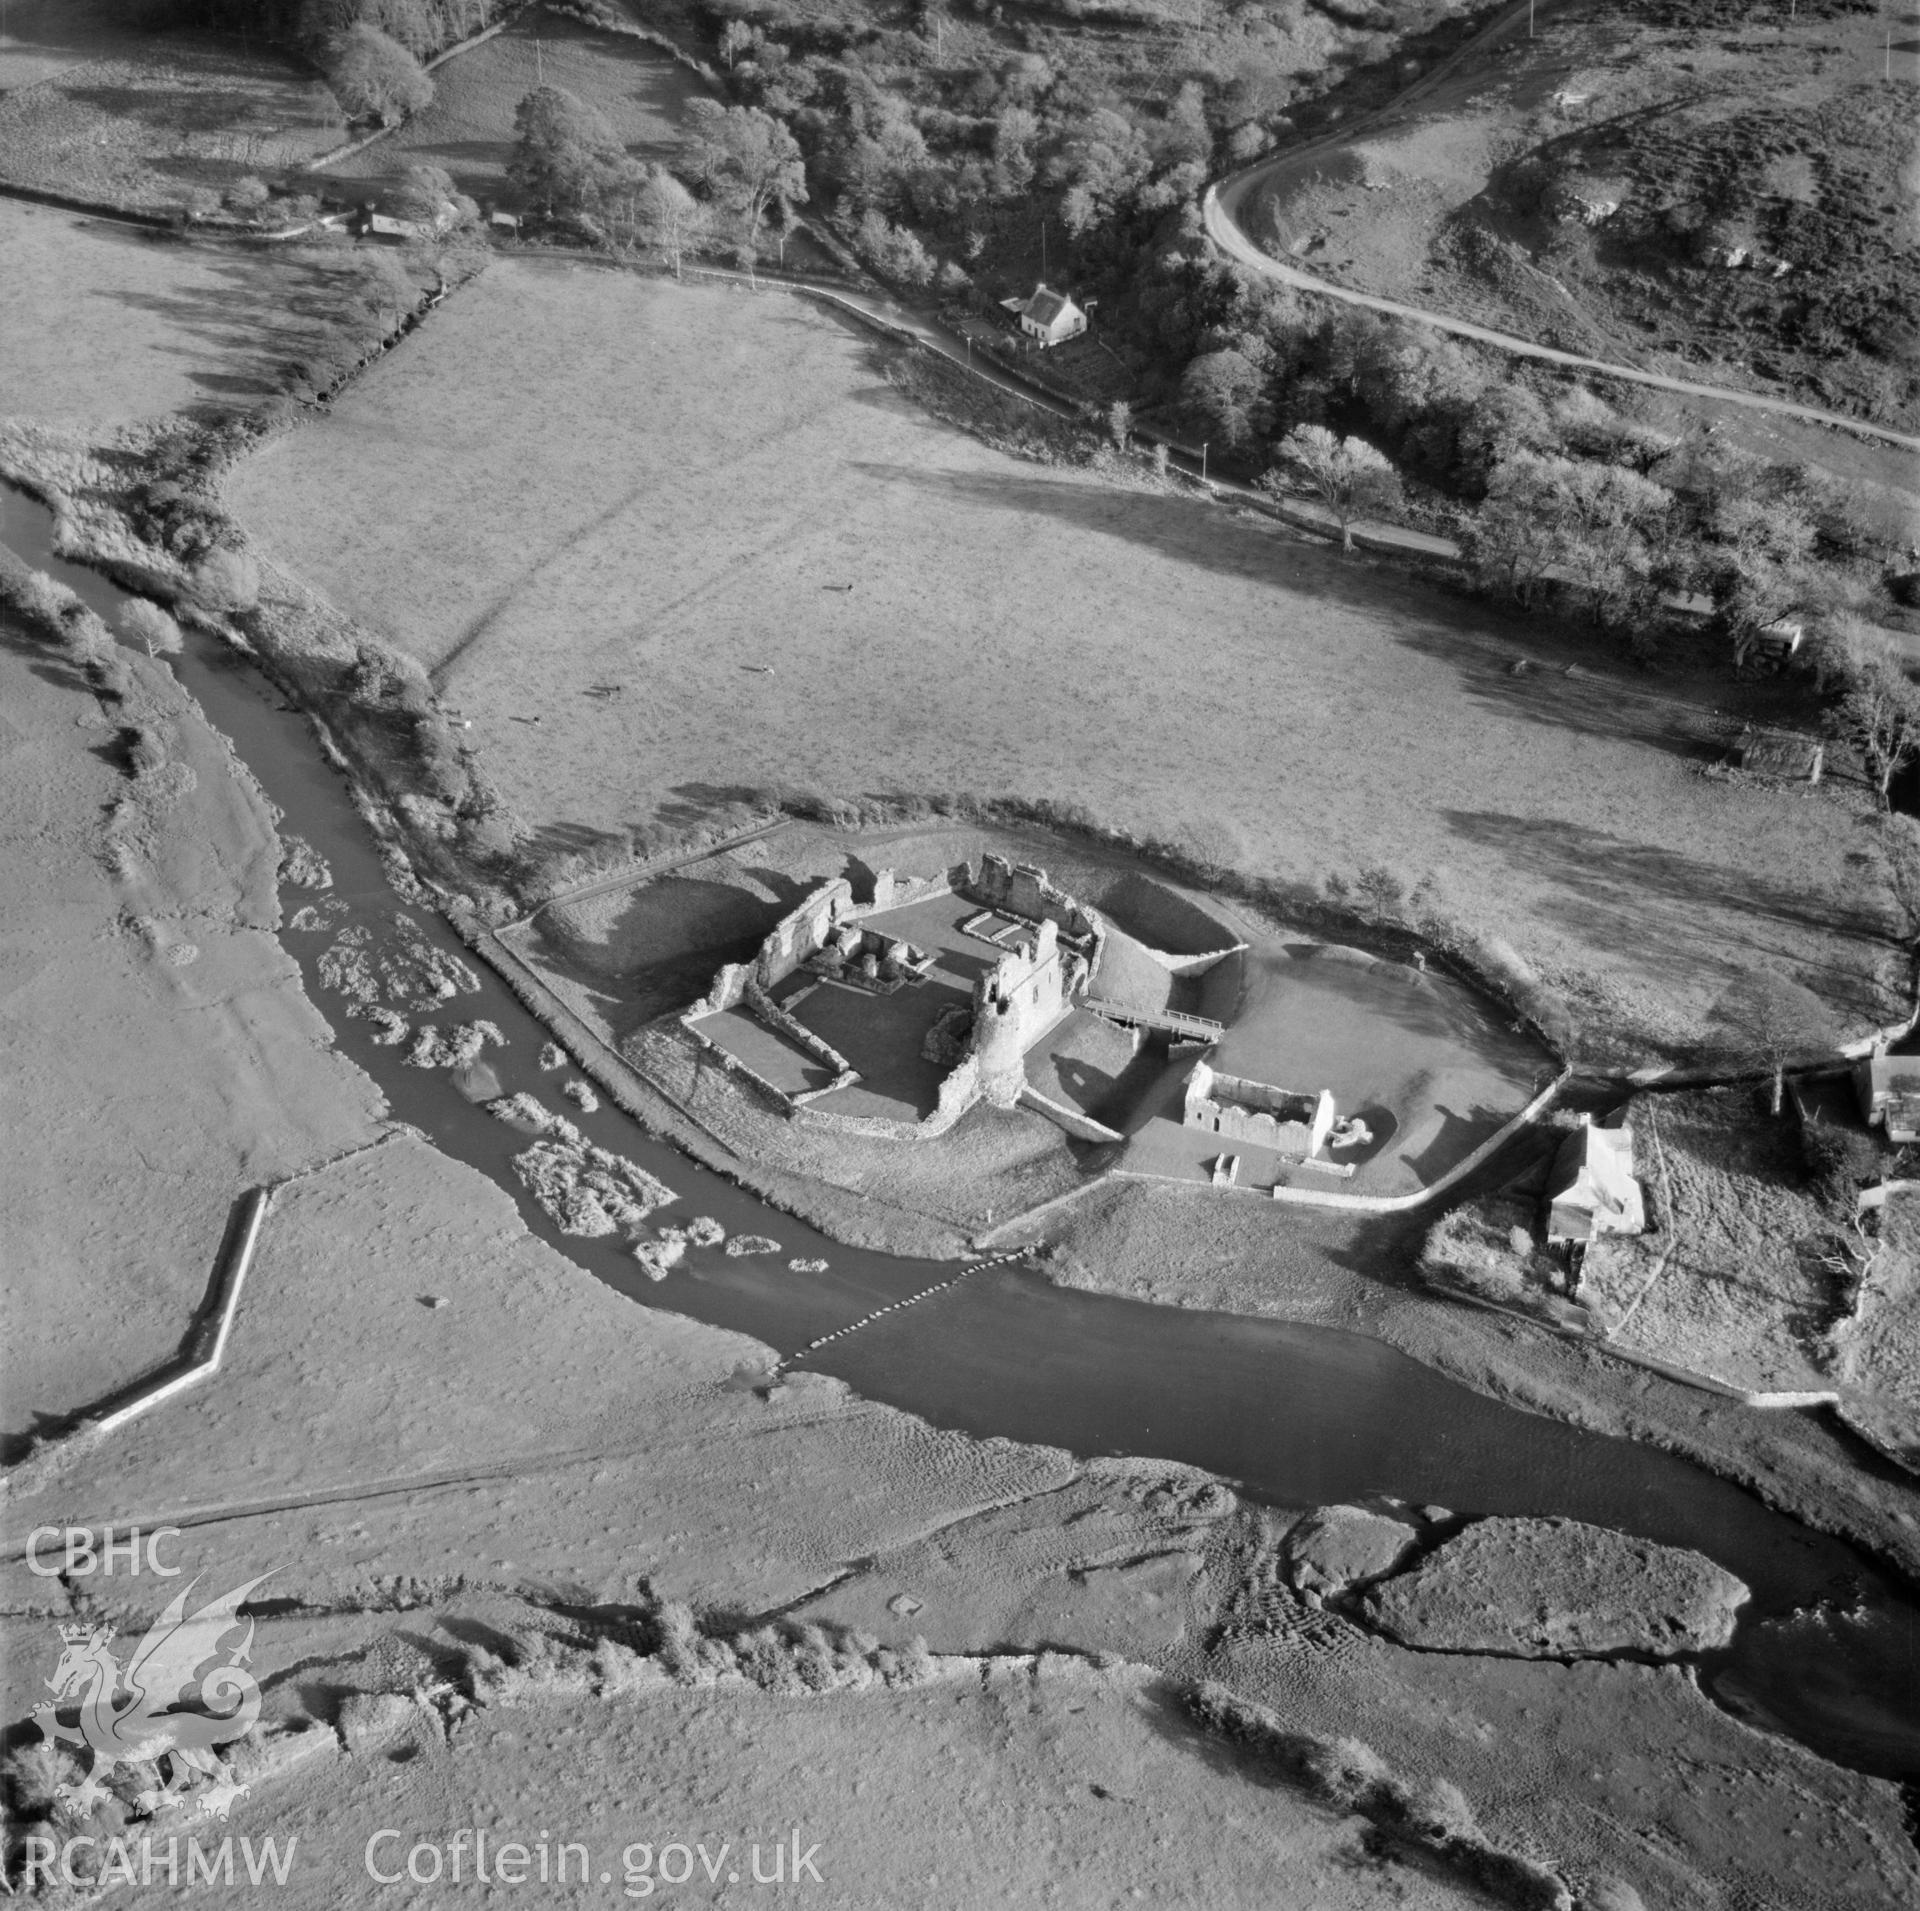 View of Ogmore castle showing stepping stones